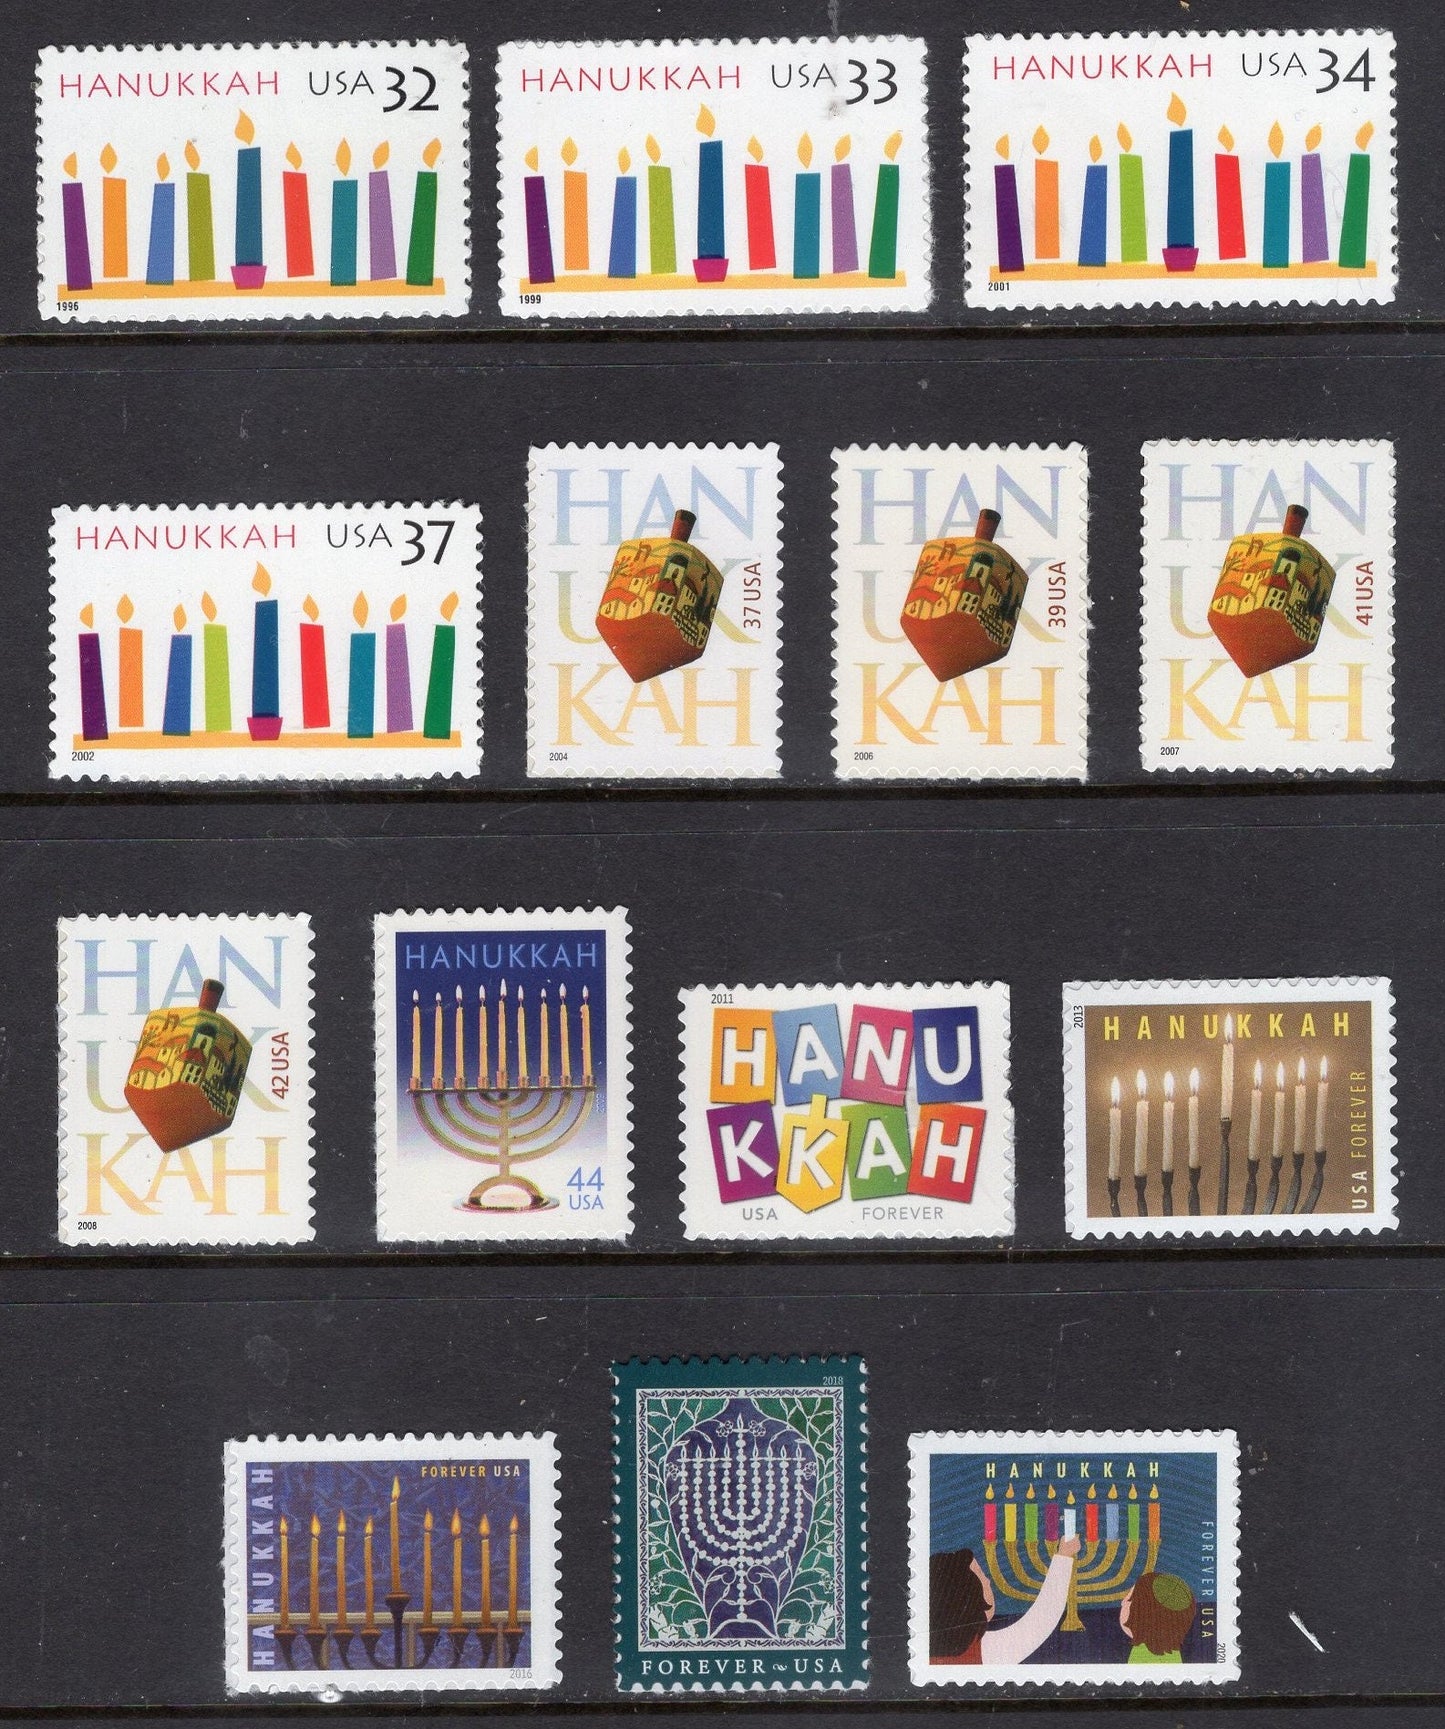 COMPLETE HANUKKAH COLLECTION 1996-on 14 USA Stamps - Mint Post Office Fresh - Issued in 1996 onwards - s1-Hanukkah -